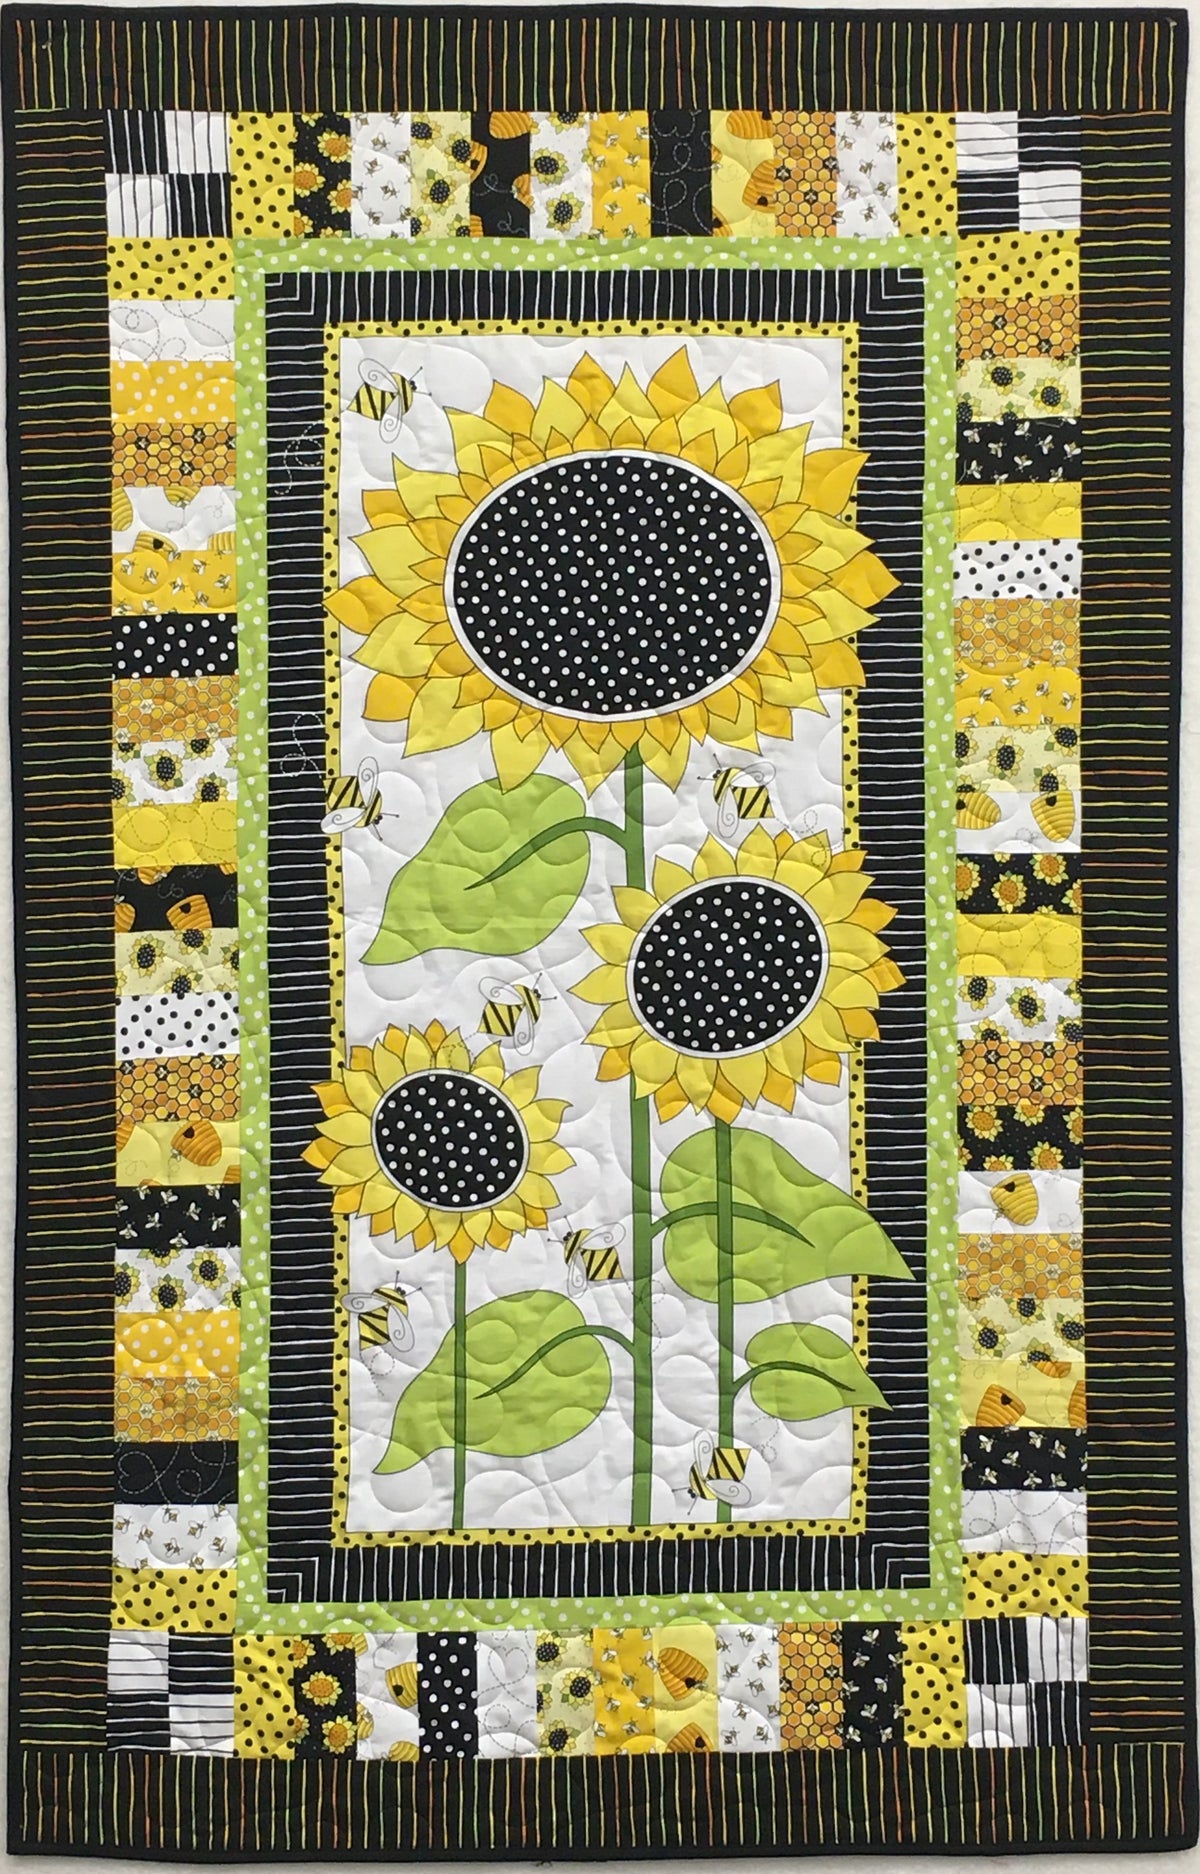  Sunflowers Safari Fabric Panel, Quilting Panel, Baby Quilt  Panel, Cotton Baby Panel, Blanket Panel, Fabric for Quilting : Arts, Crafts  & Sewing